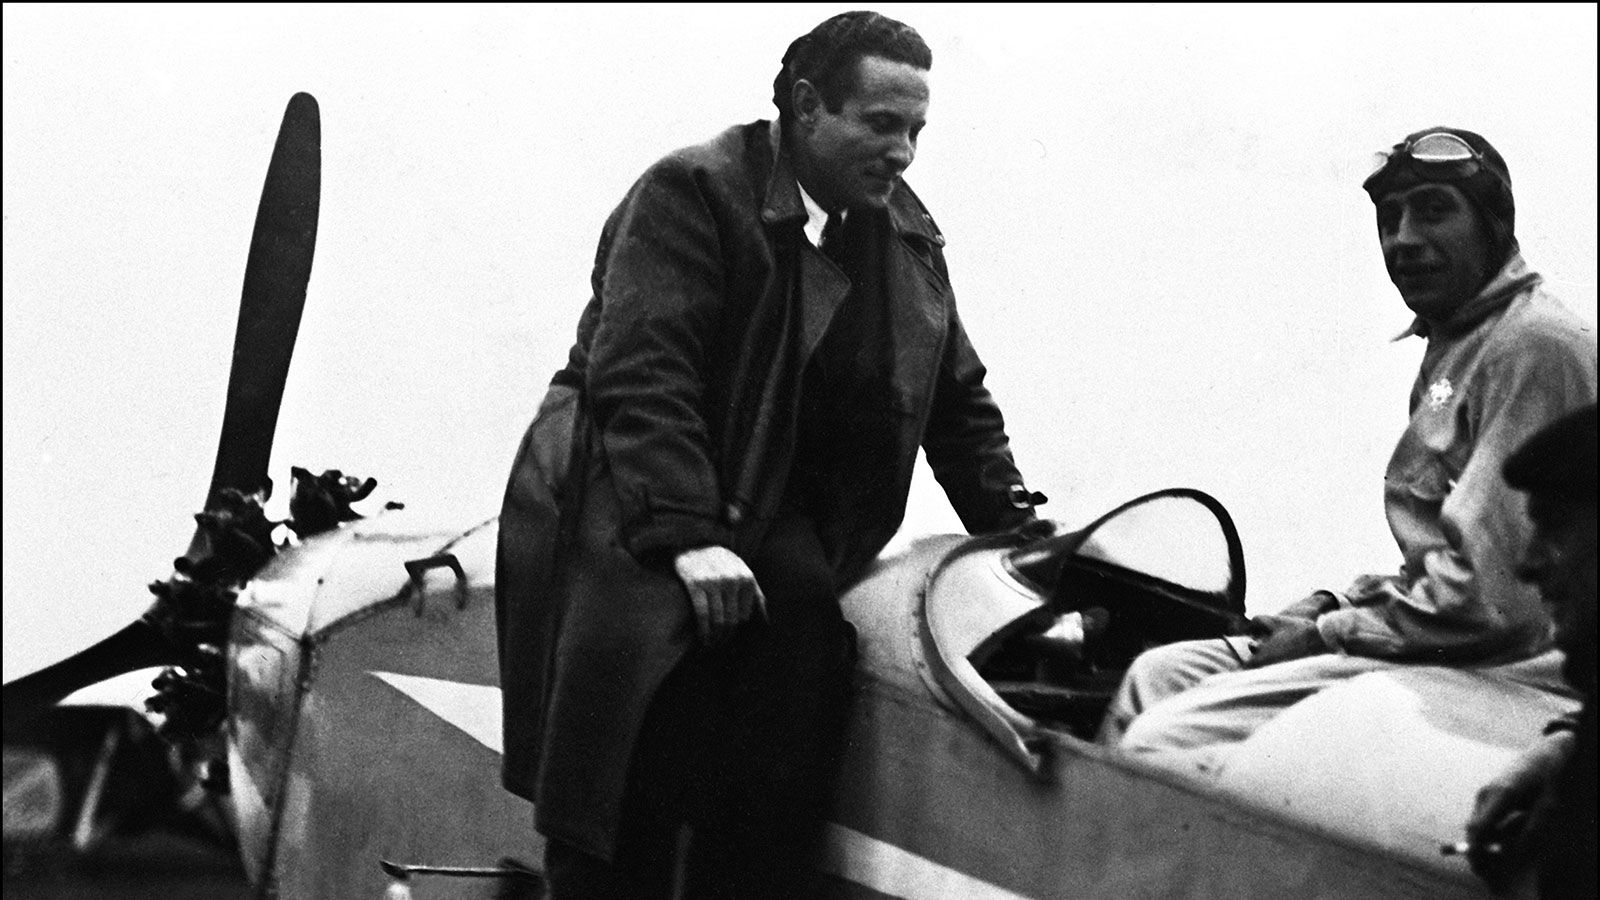 Aeropostale: The hero pilots who connected the world by airmail